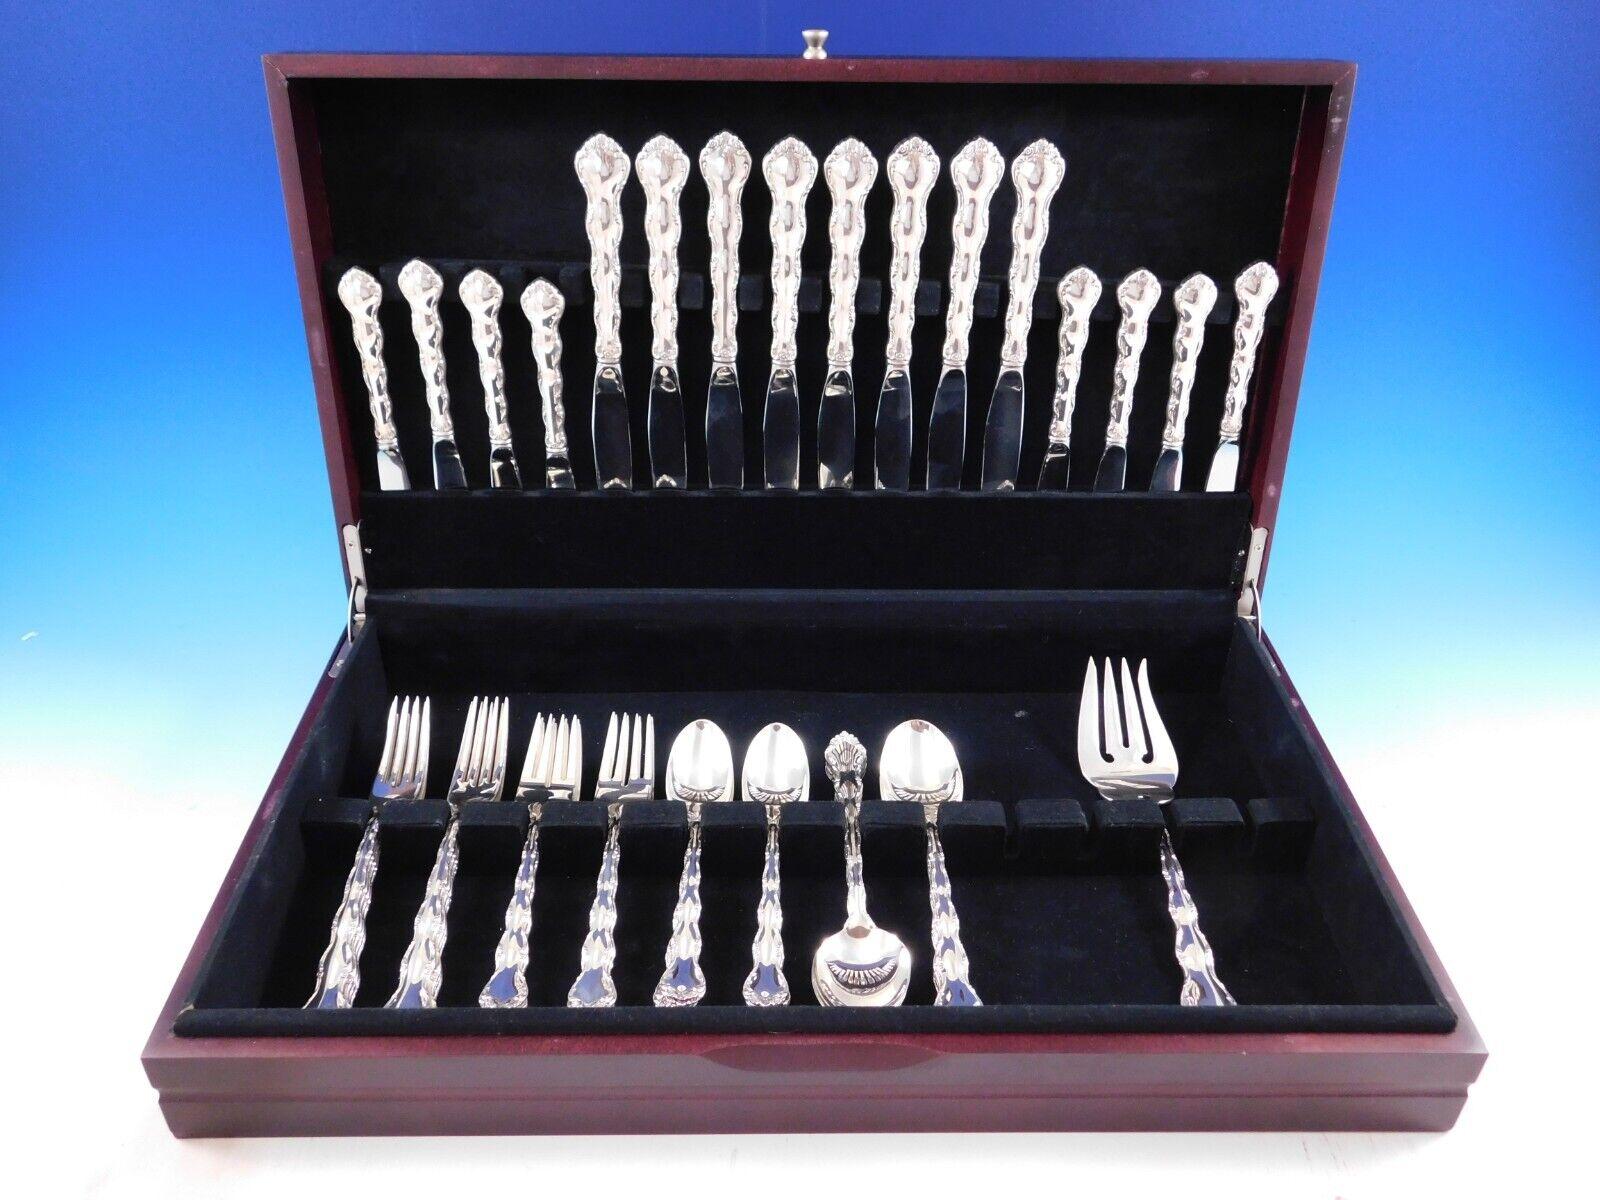 Beautiful Tara by Reed & Barton sterling silver Flatware set - 49 pieces. This set includes:

8 Knives, 9 1/8